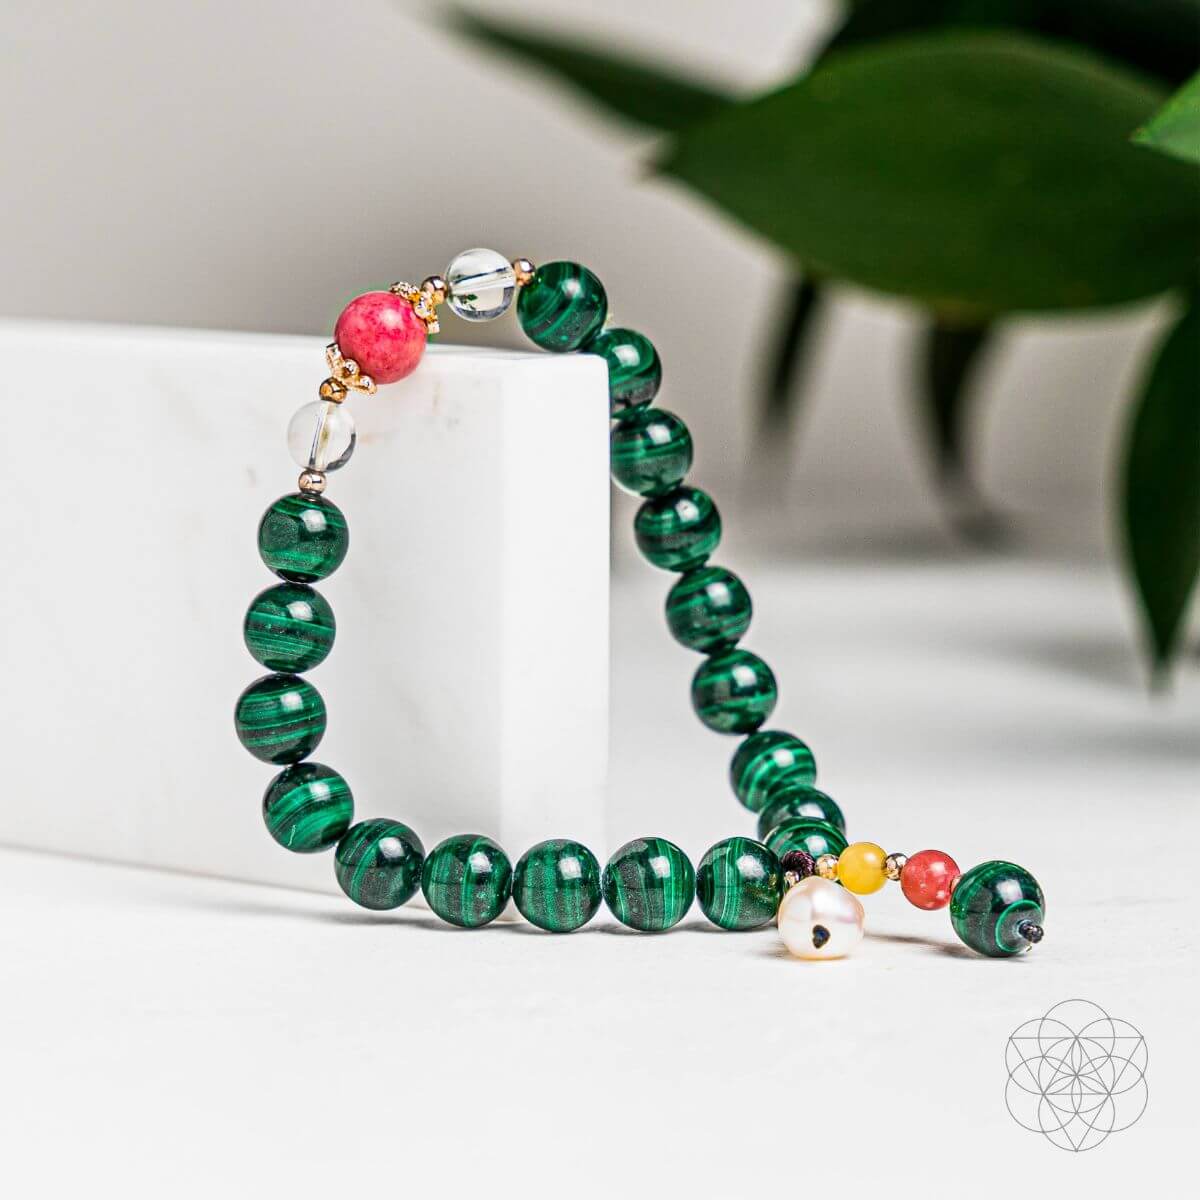 The Law of Attraction Bracelet